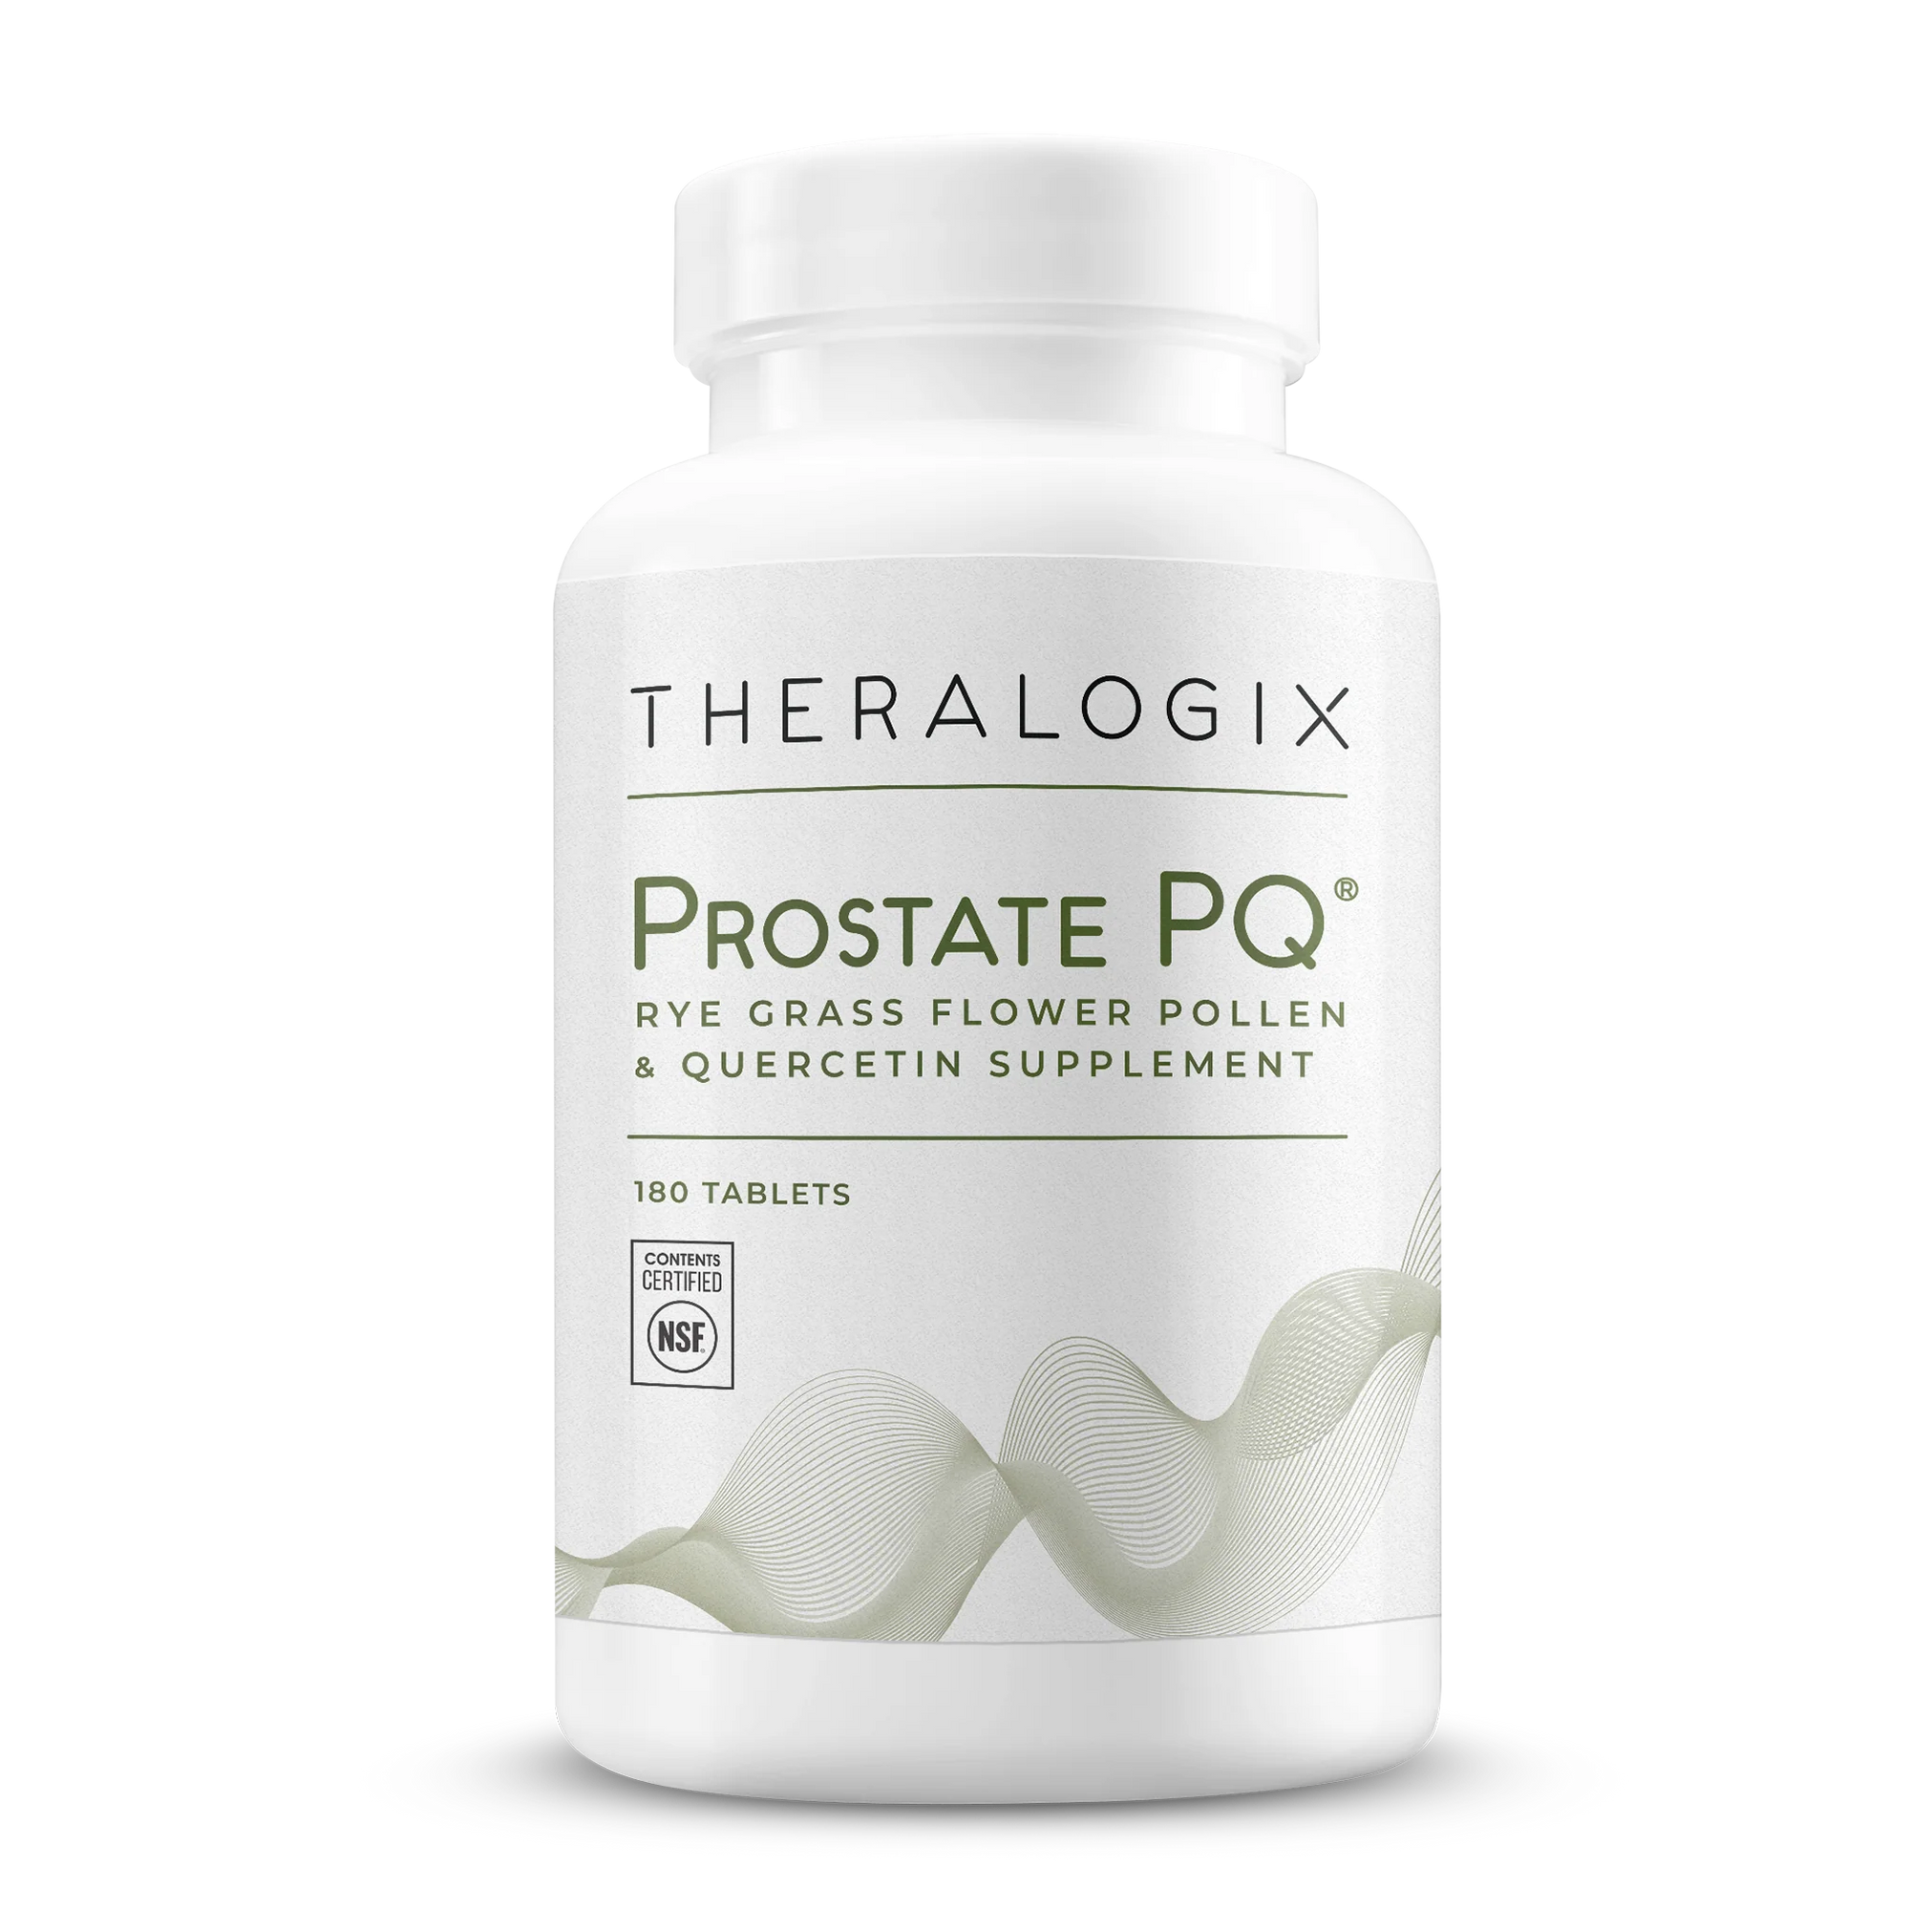 Prostate PQ® Rye Grass Flower Pollen & Quercetin Supplement (Ships from the US, arrives in 11-14 days)